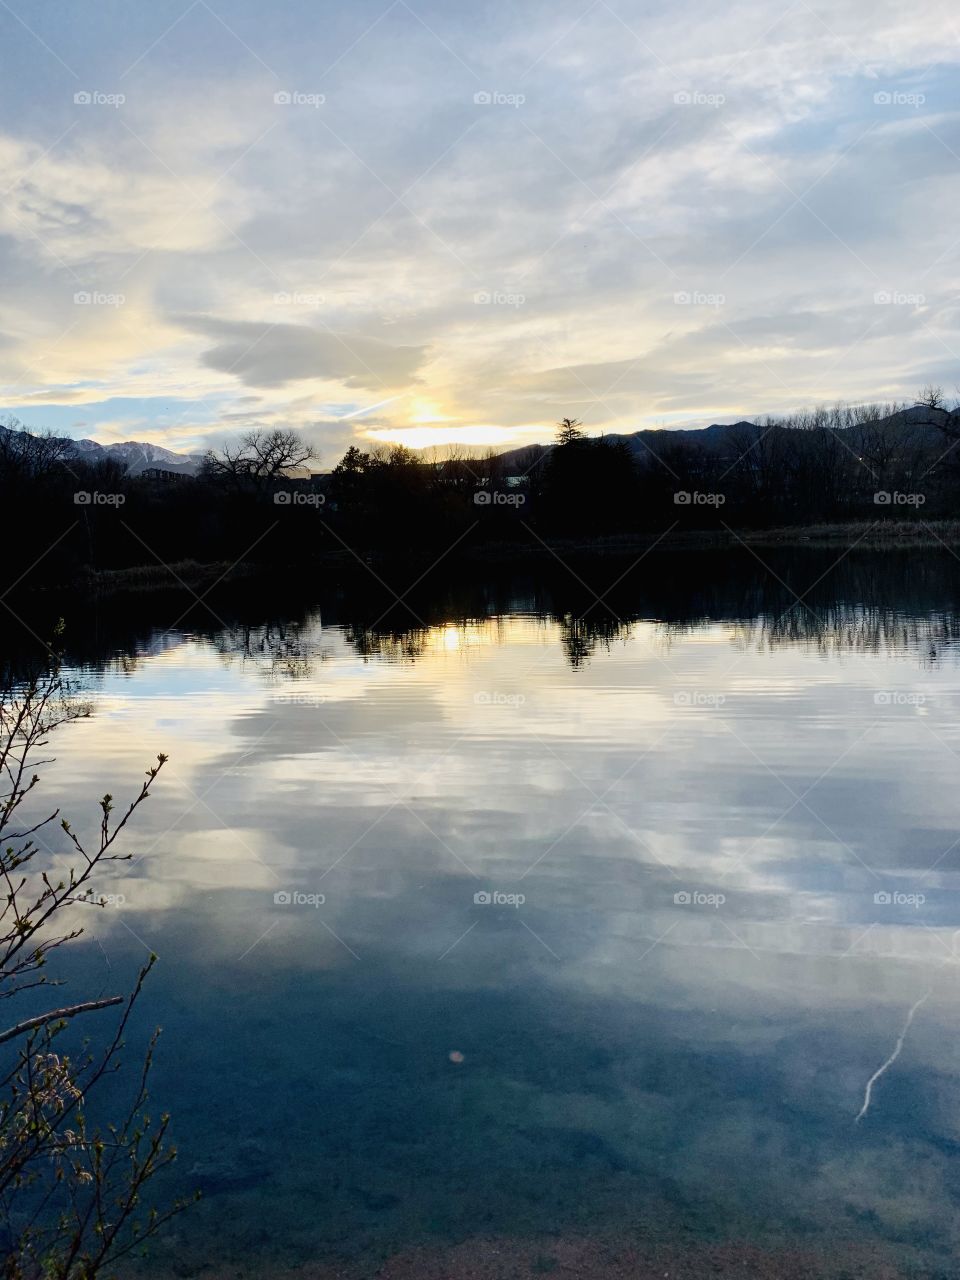 Mixture of clouds and sun reflecting off of quail pond in Southern Colorado Springs